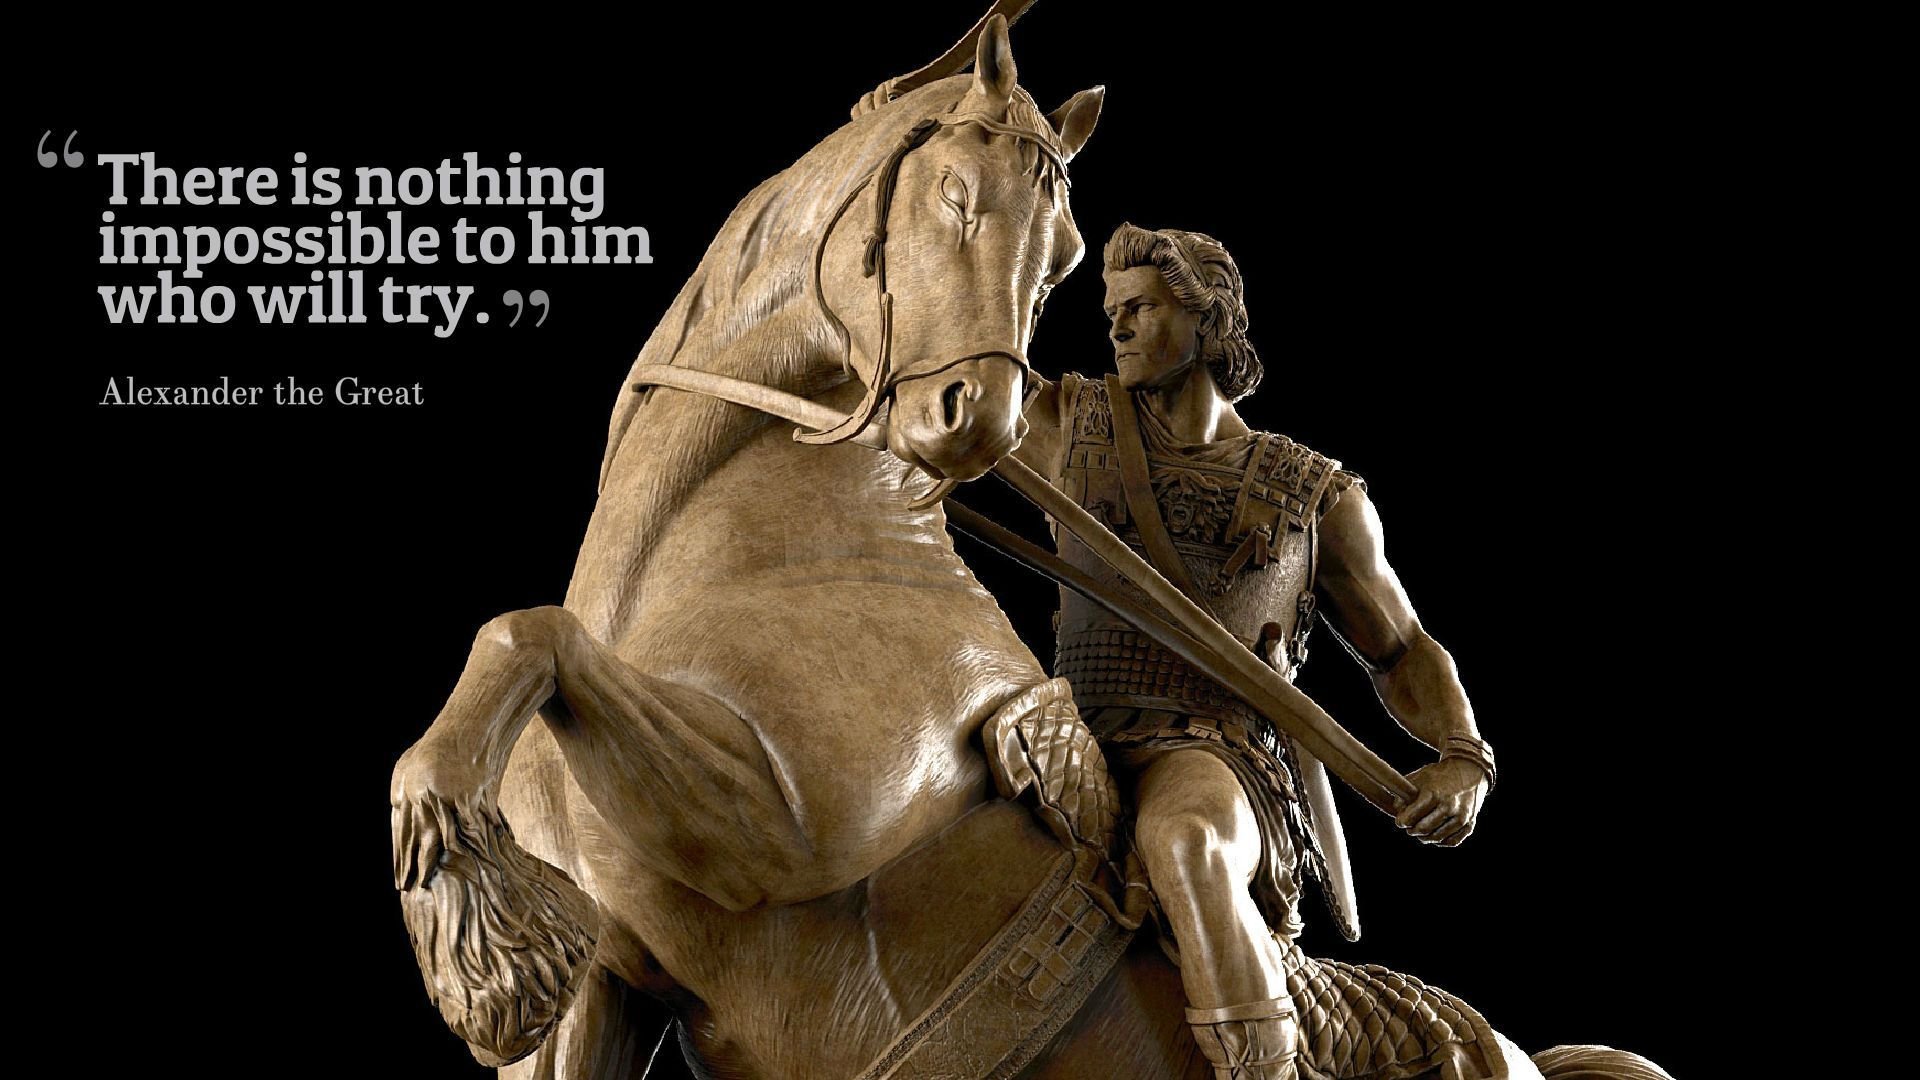 Alexander the Great Wallpaper Free Alexander the Great